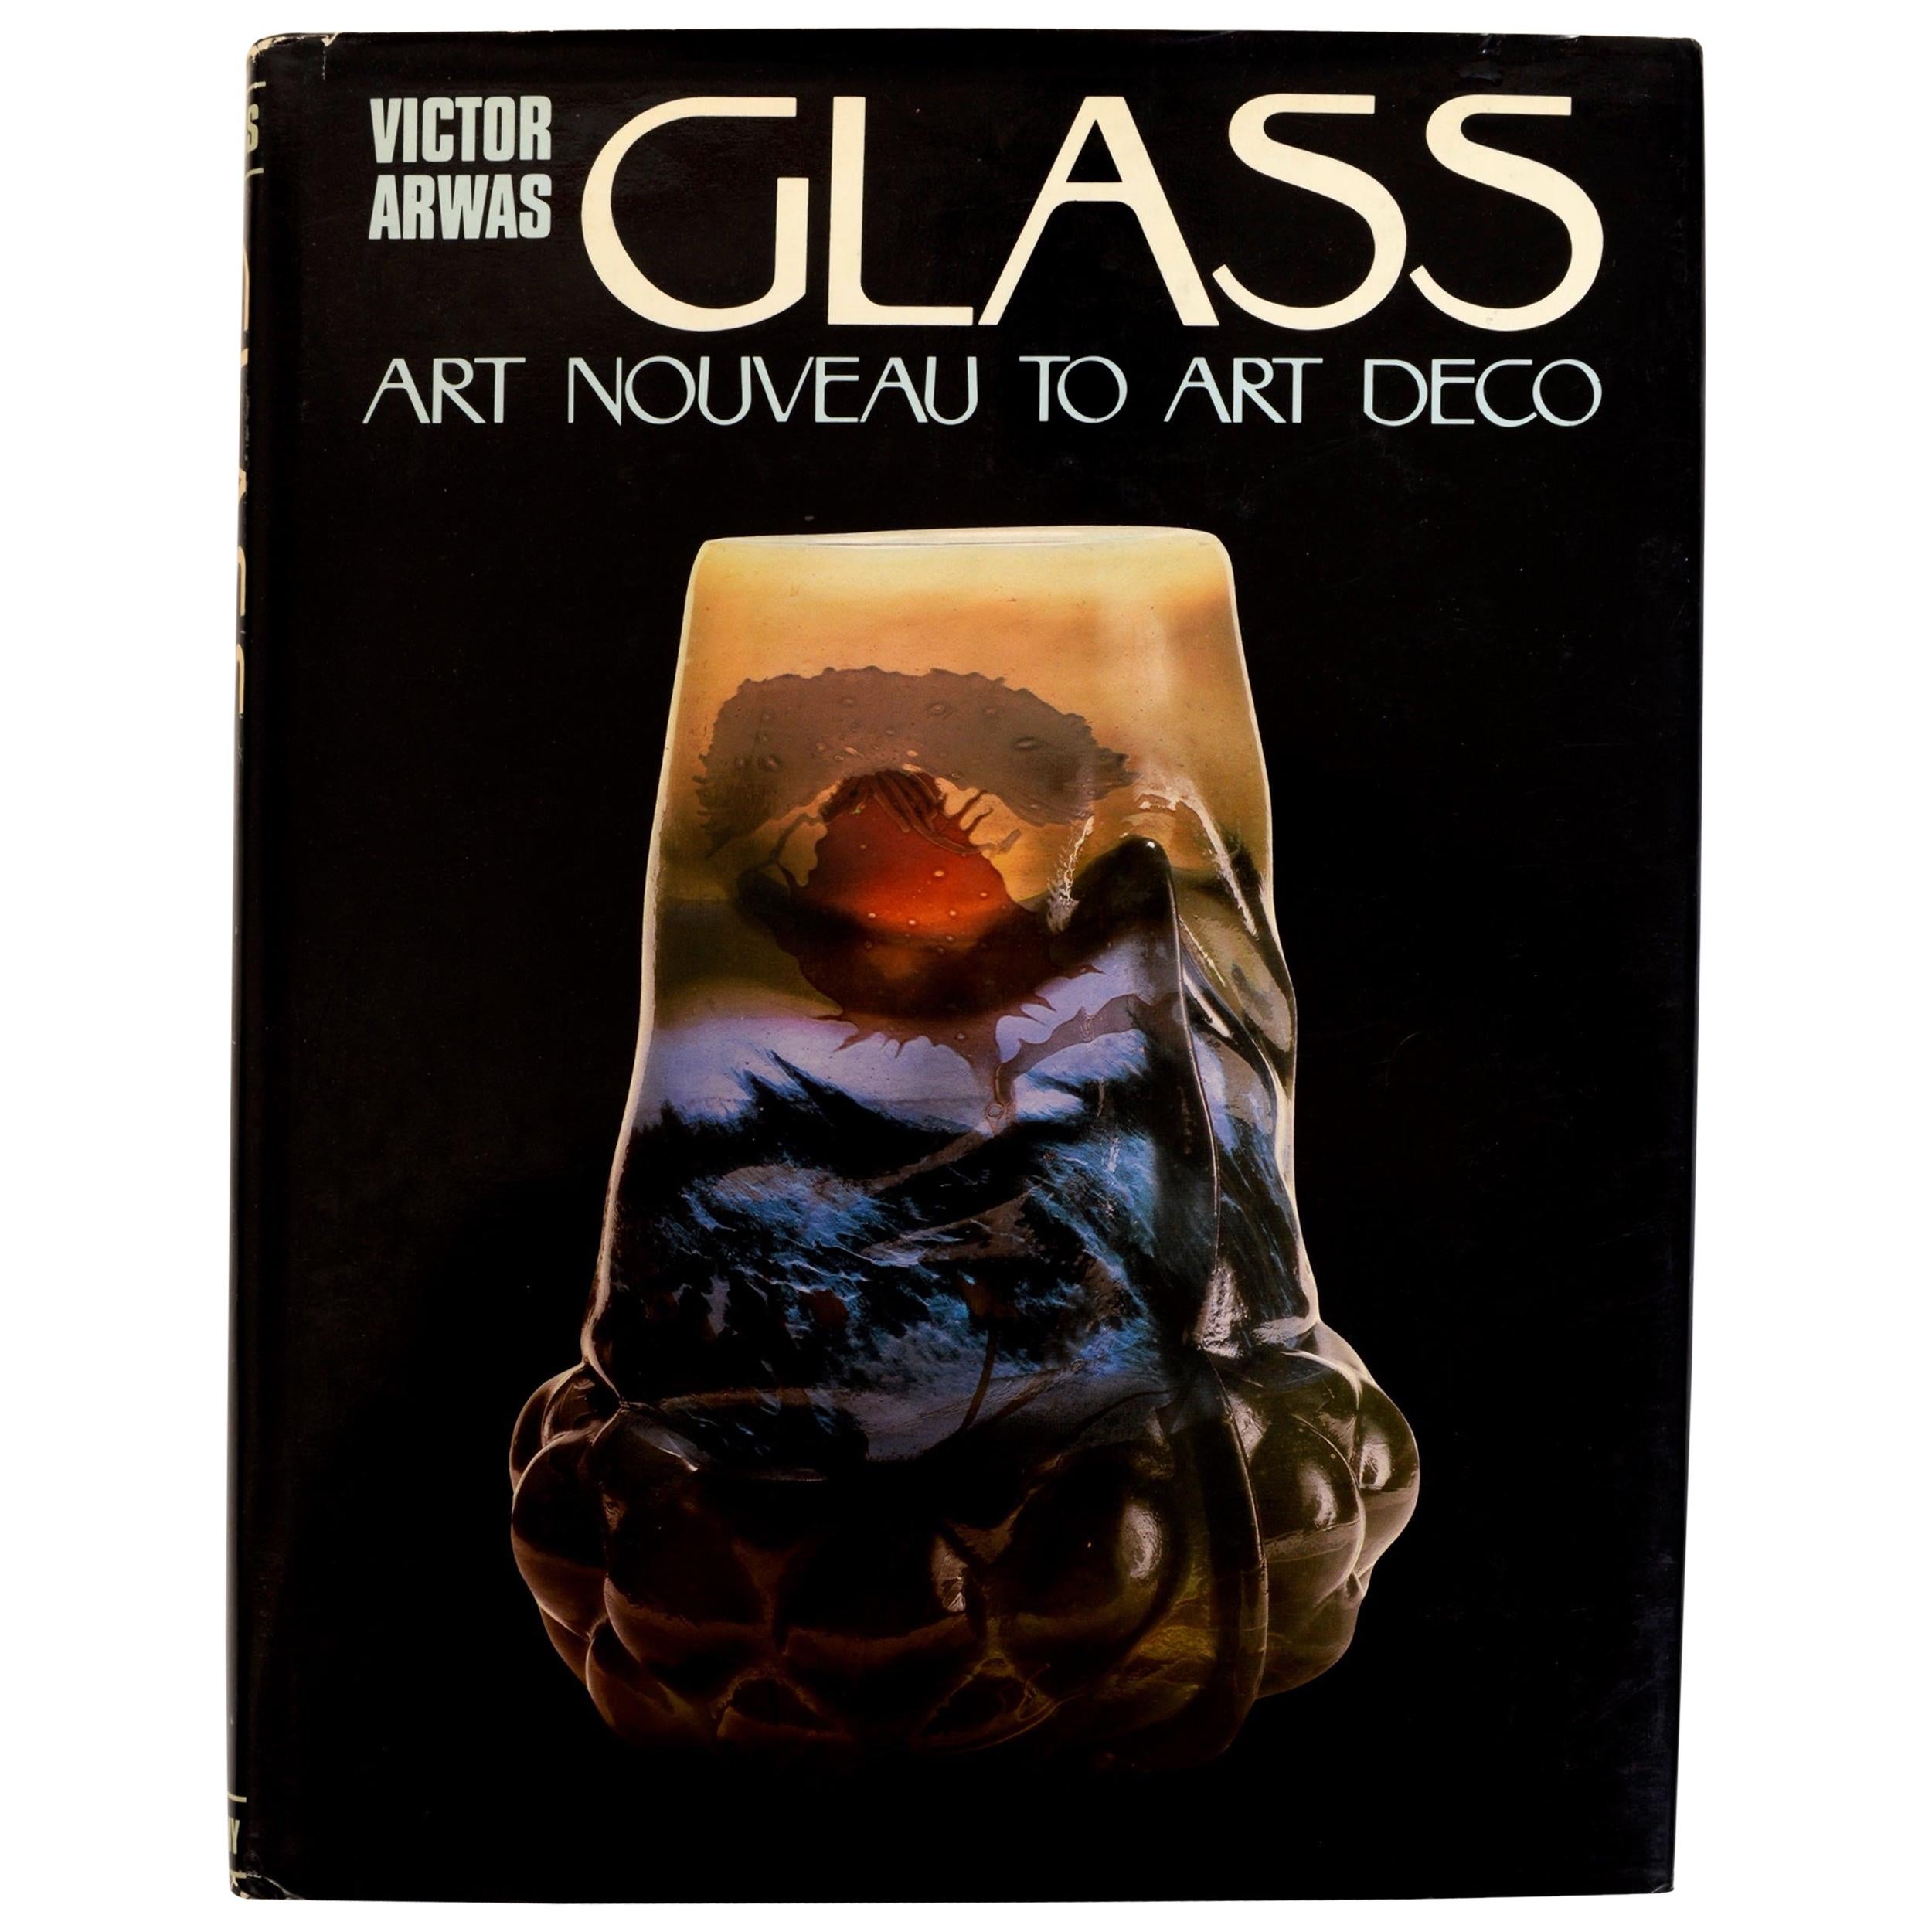 Glass Art Nouveau to Art Deco by Victor Arwas